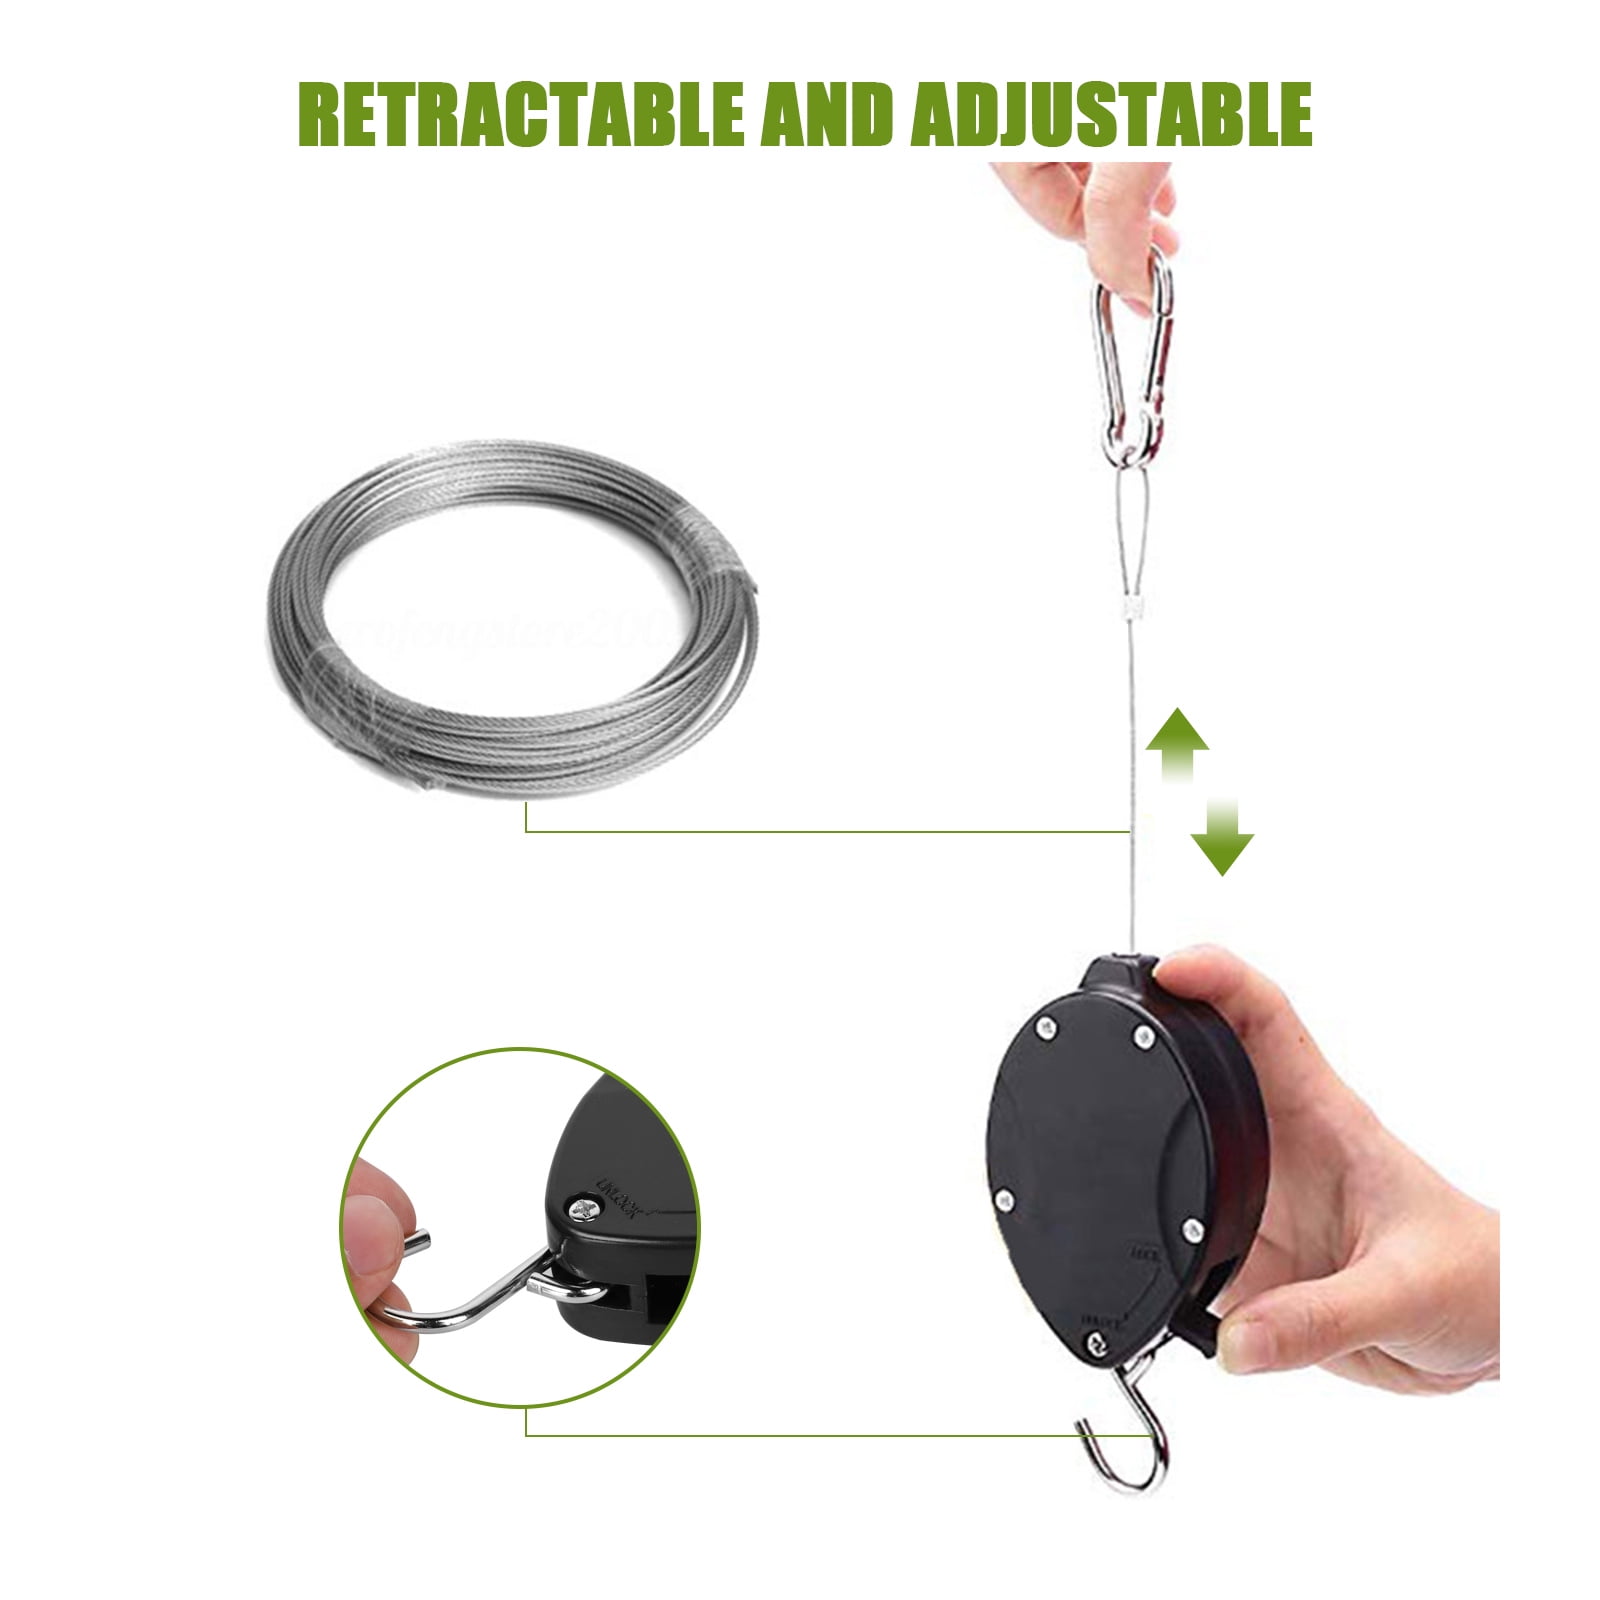 2pcs Retractable Plant Pulley with Locking, TSV Adjustable Plant